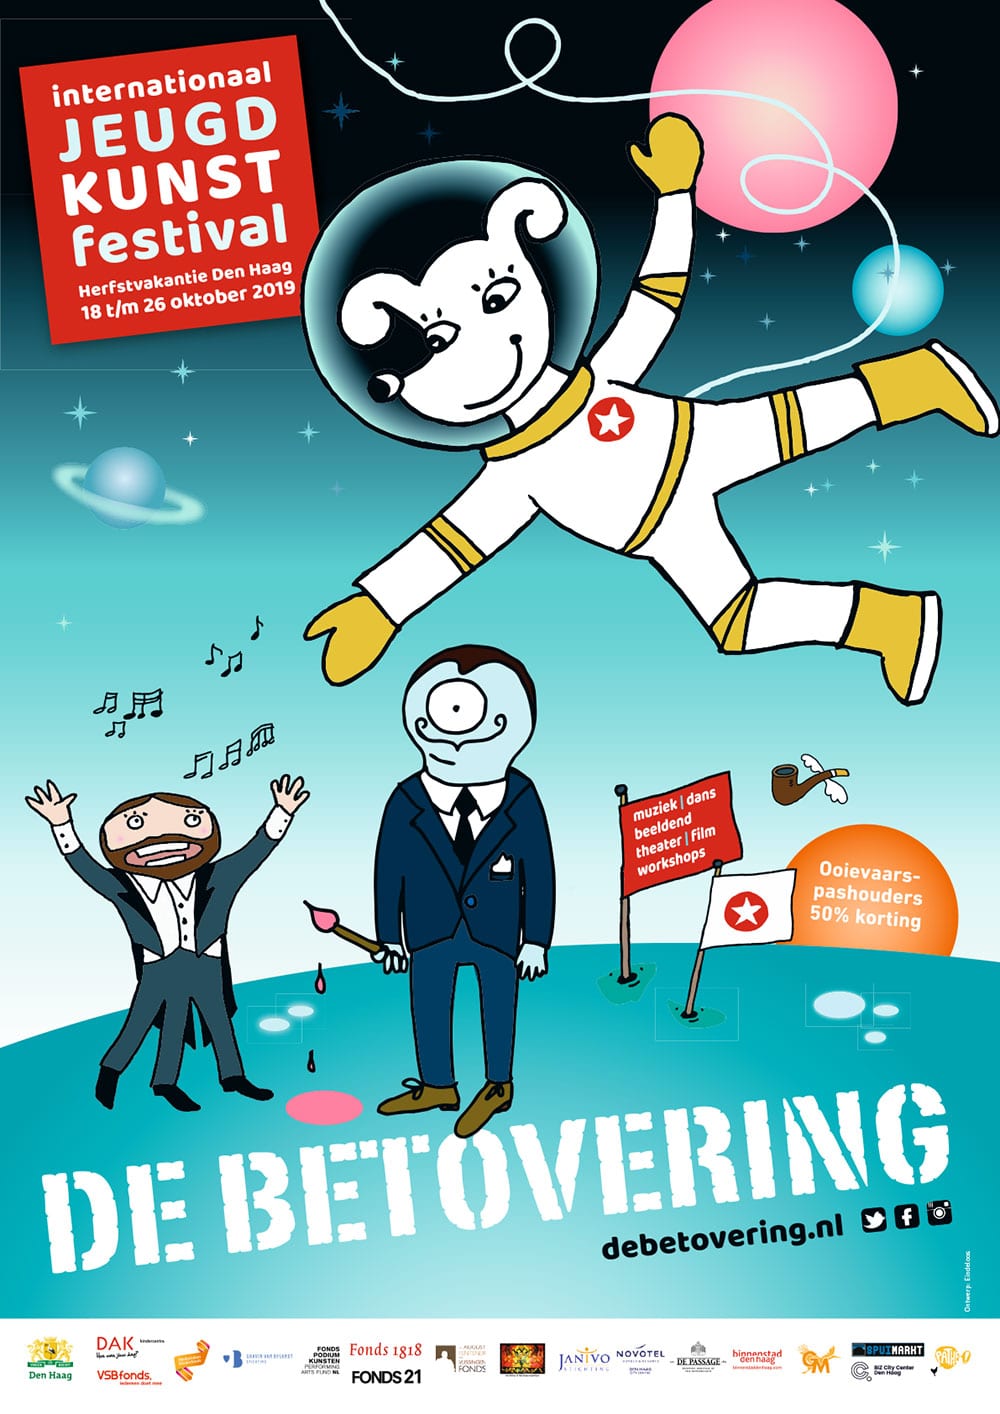 Betovering affiche 2019